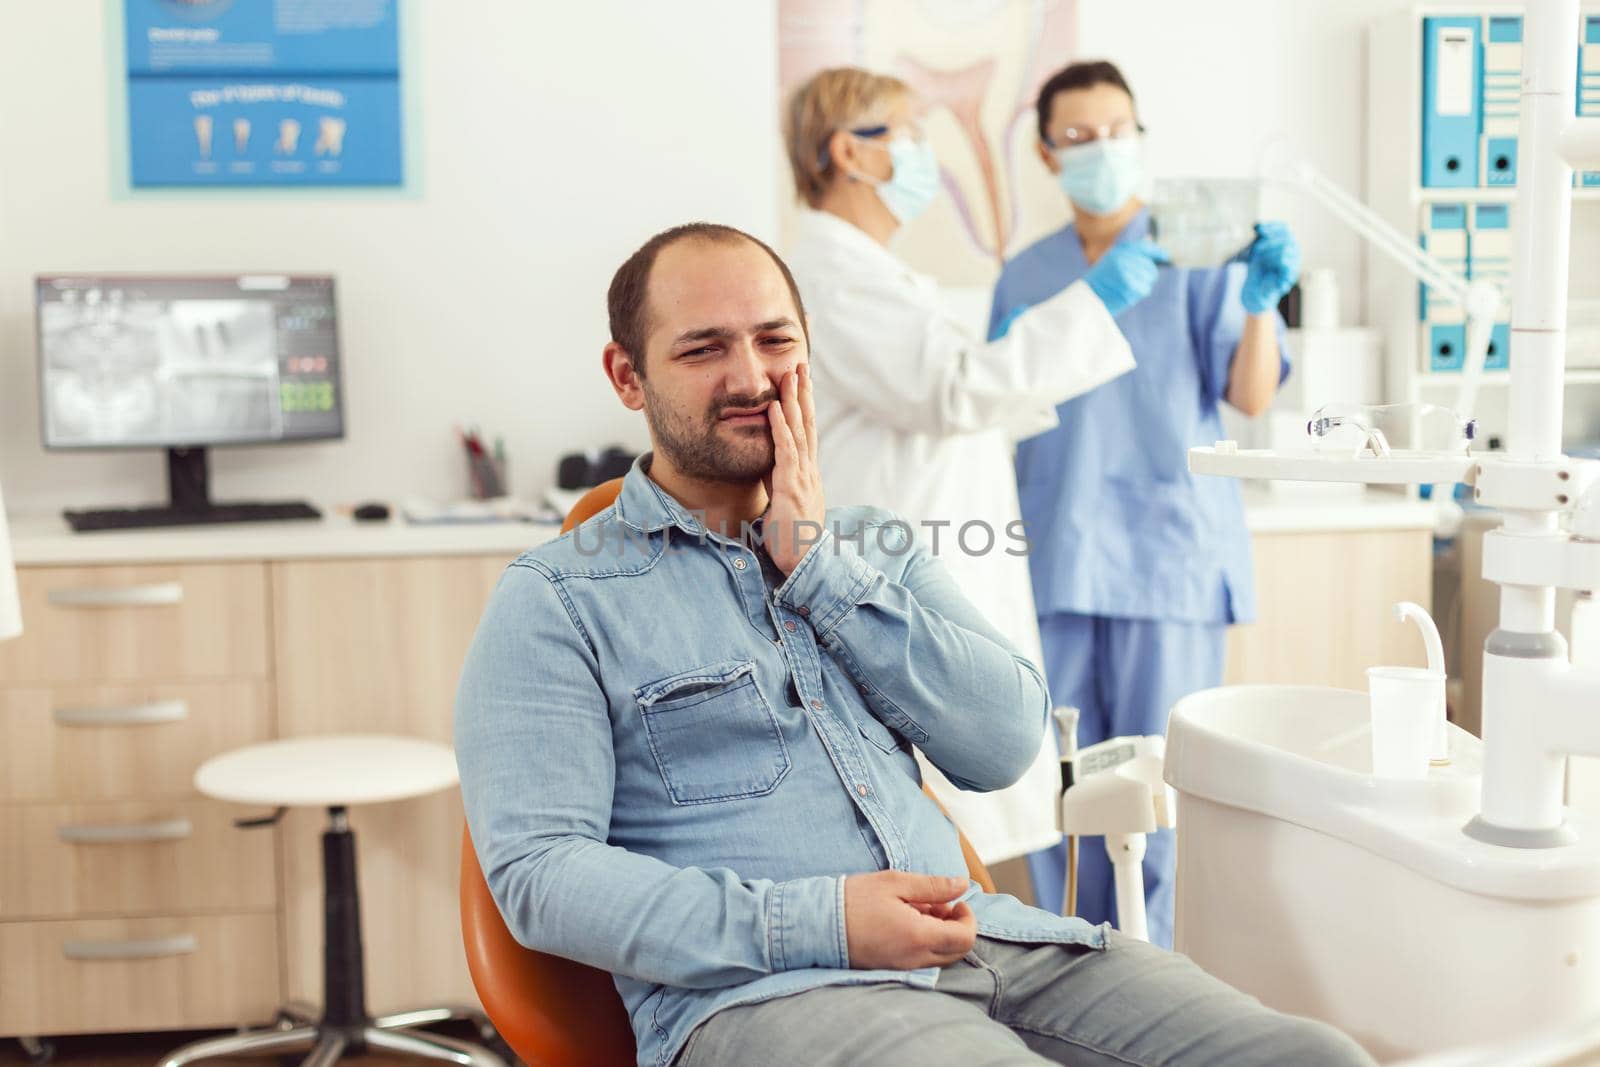 Sick patient complaining about teeth pain while waiting for dentists doctors to check toothache. Senior orthodontic doctor and medical nurse examining x-ray working in hospital stomatology clinic